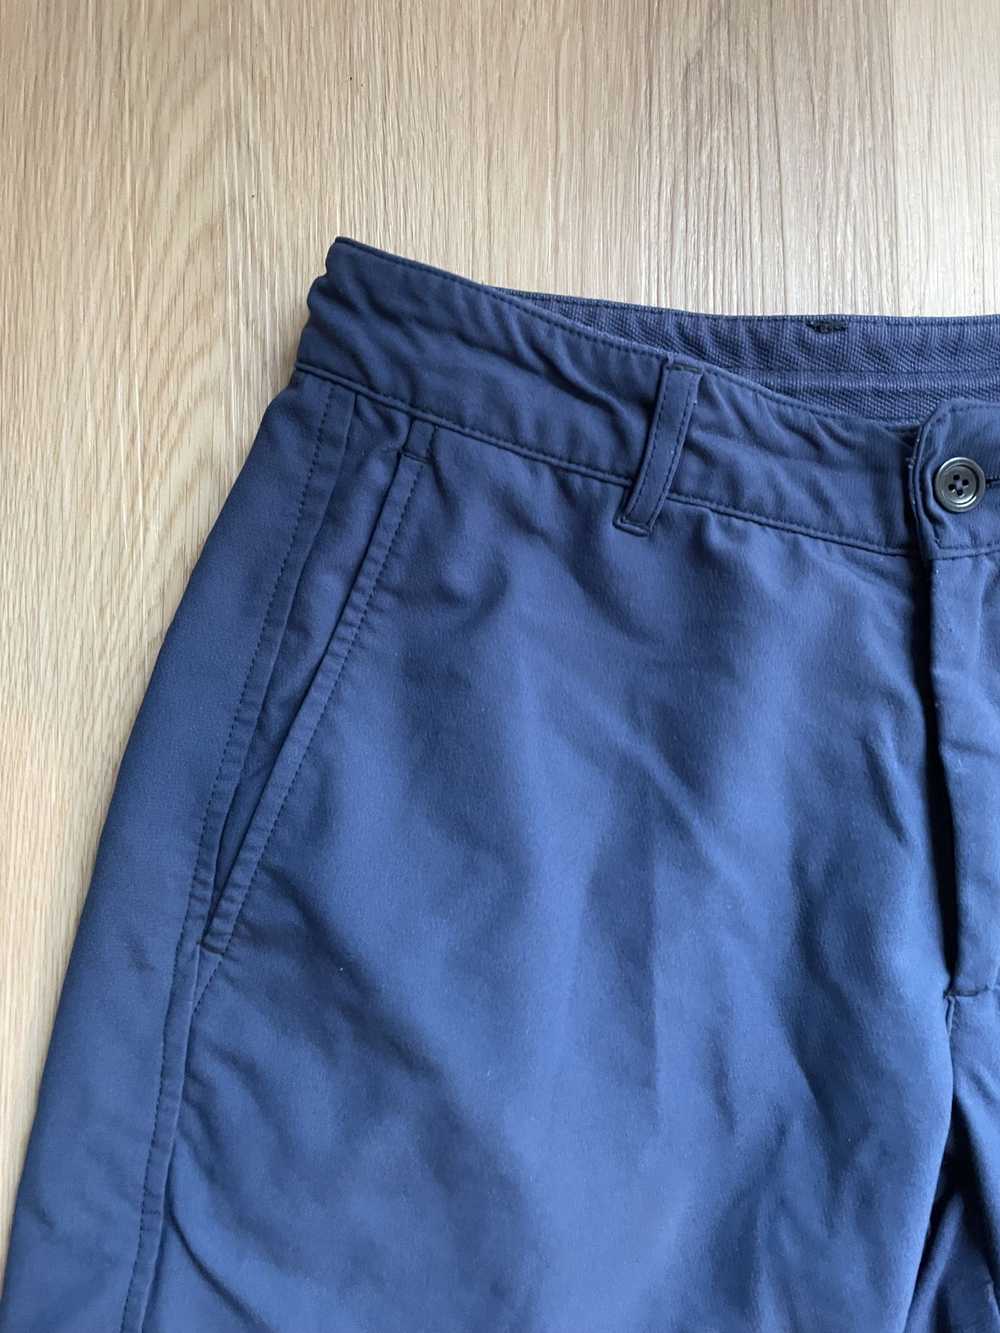 Outlier Outlier Three Way Shorts Navy Blue Men's … - image 6